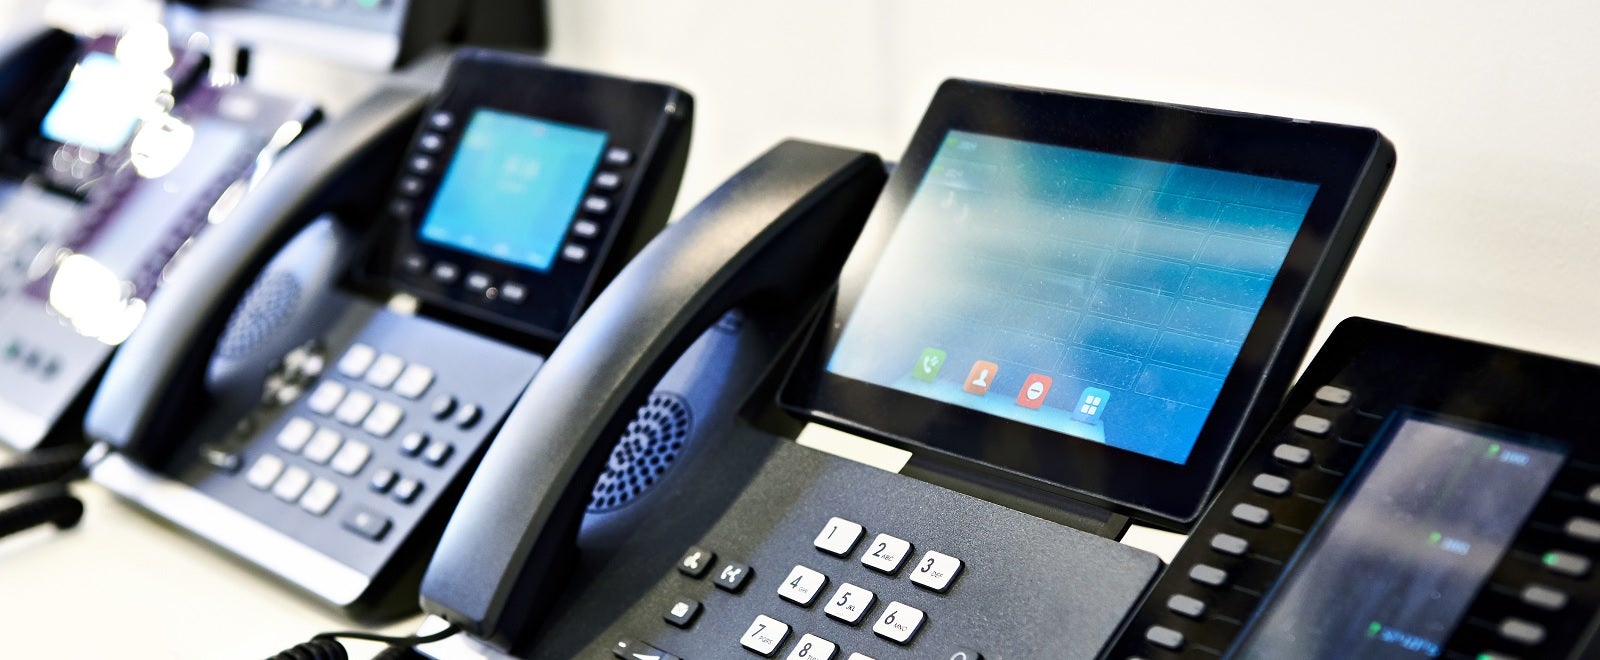 How To Choose The Best Office Phone Systems For Small Business?